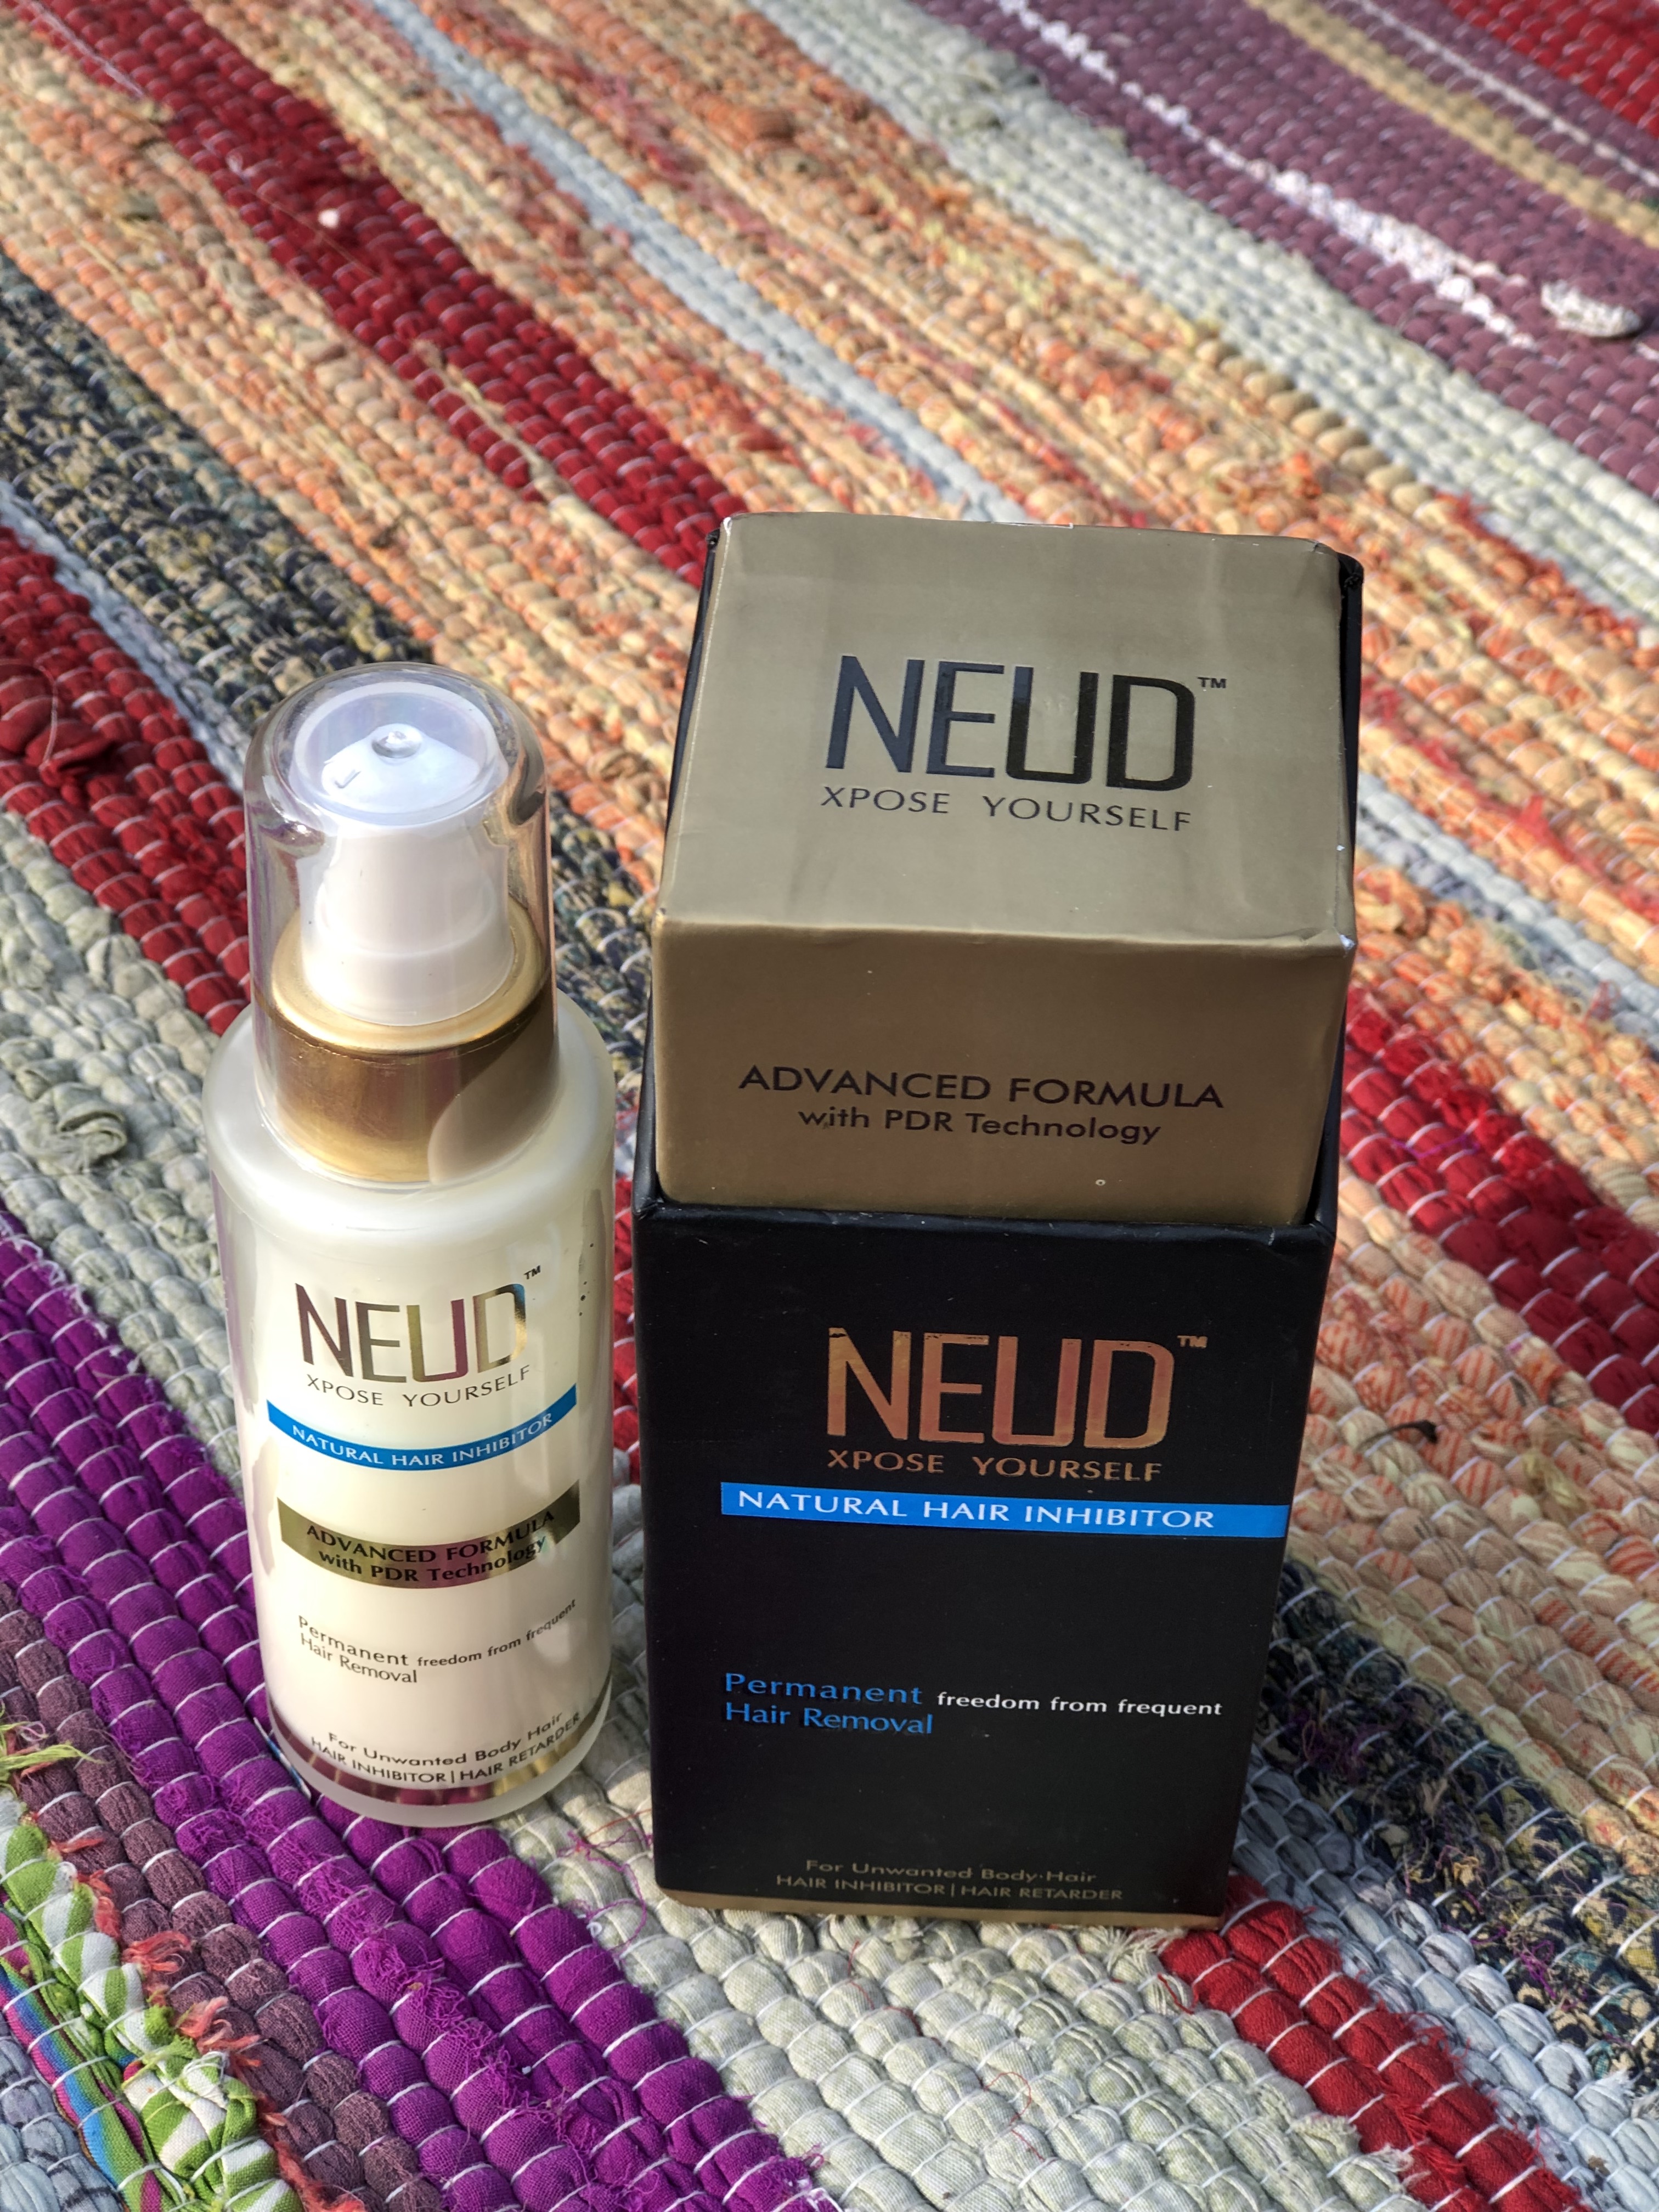 Get Rid Of Unwanted Hair Permanently With NEUD